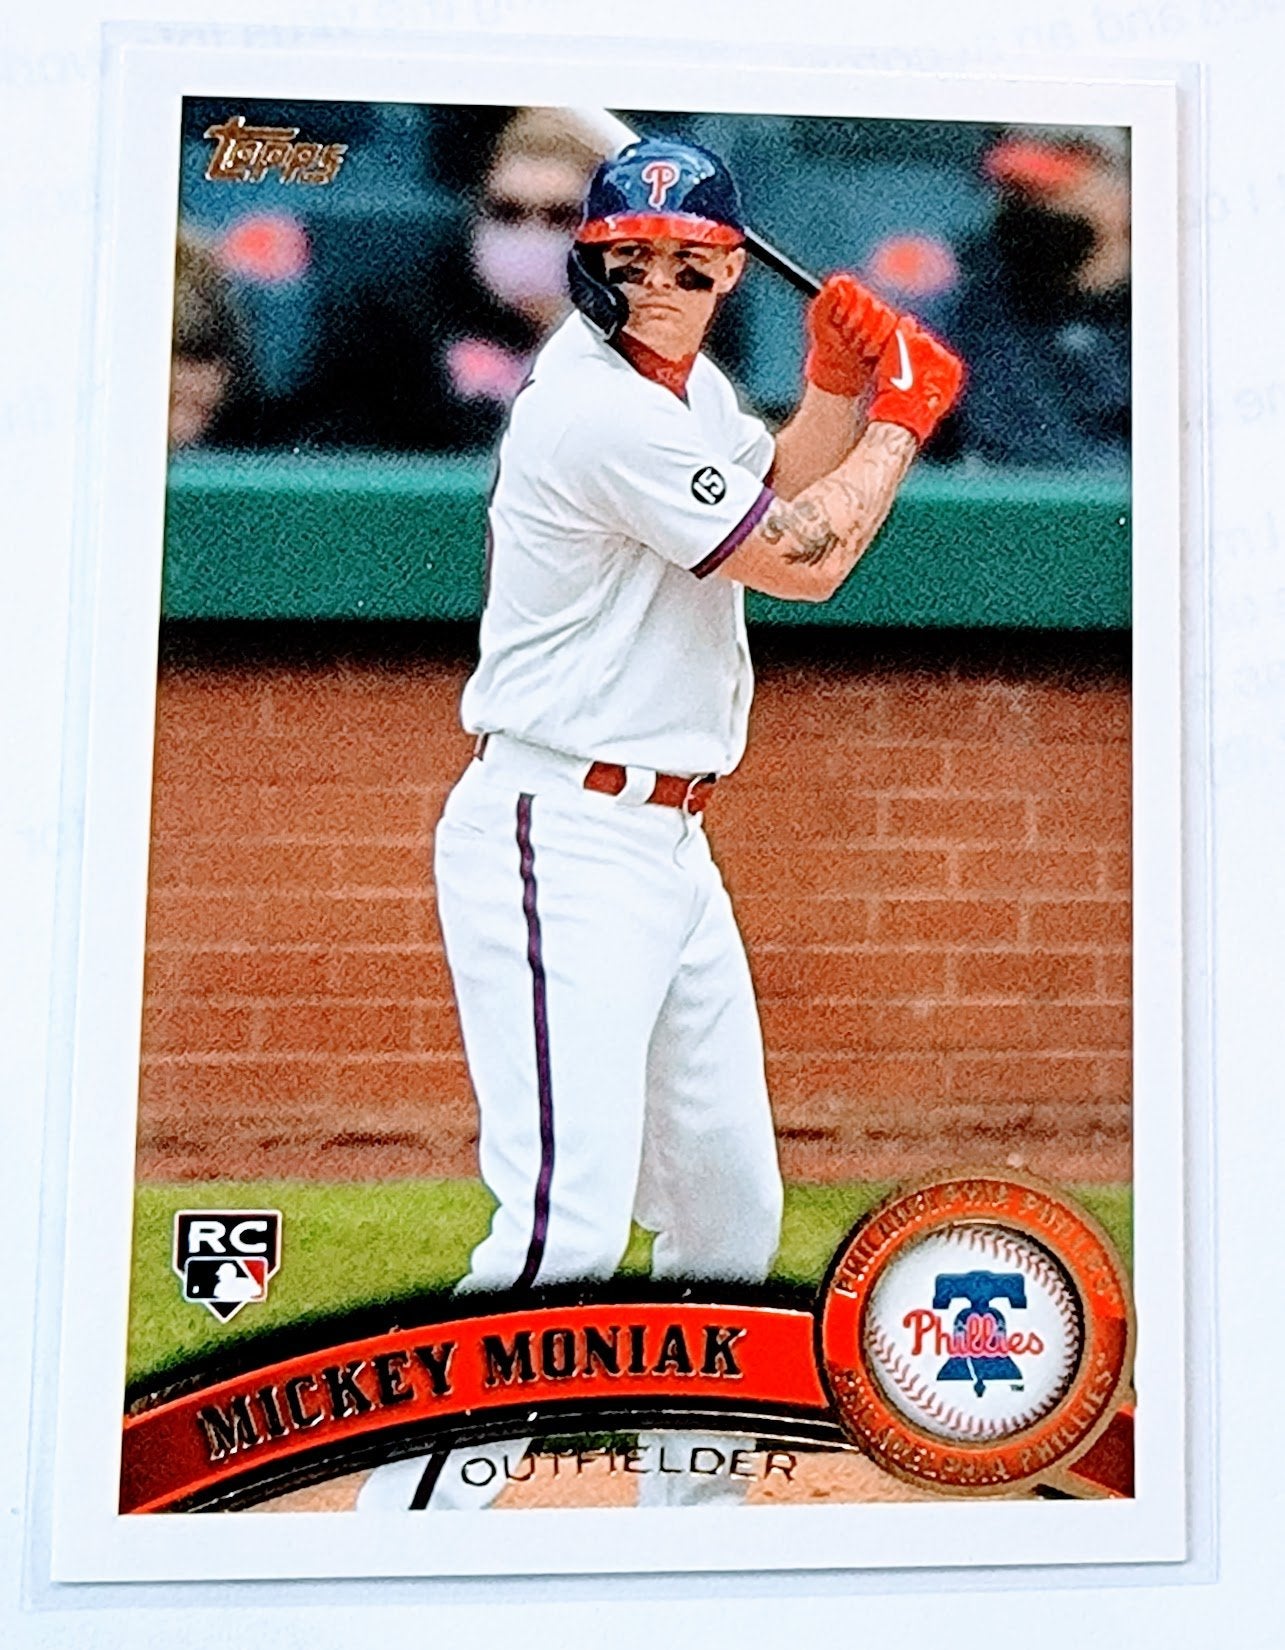 2021 Topps Archives Mickey Moniak 2011 Baseball Trading Card SMCB1 simple Xclusive Collectibles   